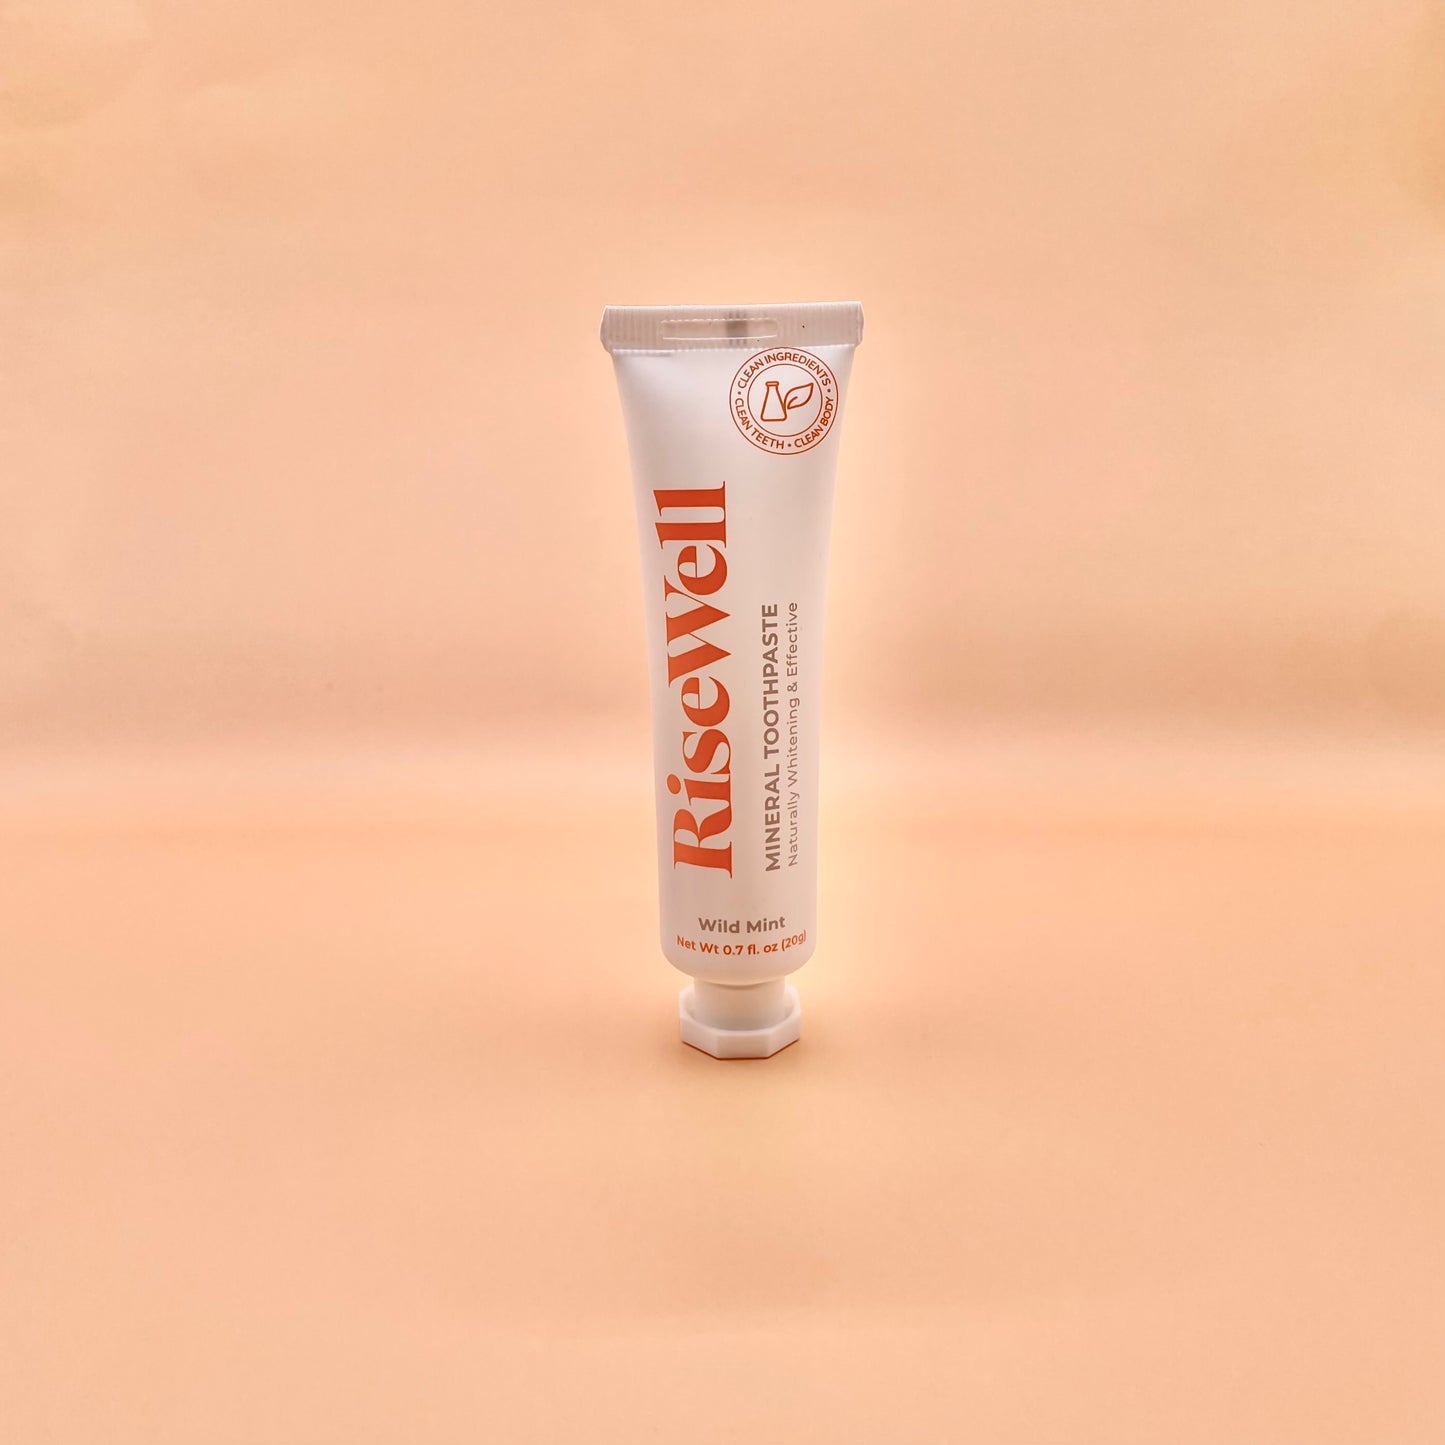 RiseWell wild mint natural hydroxyapatite fluoride-free toothpaste